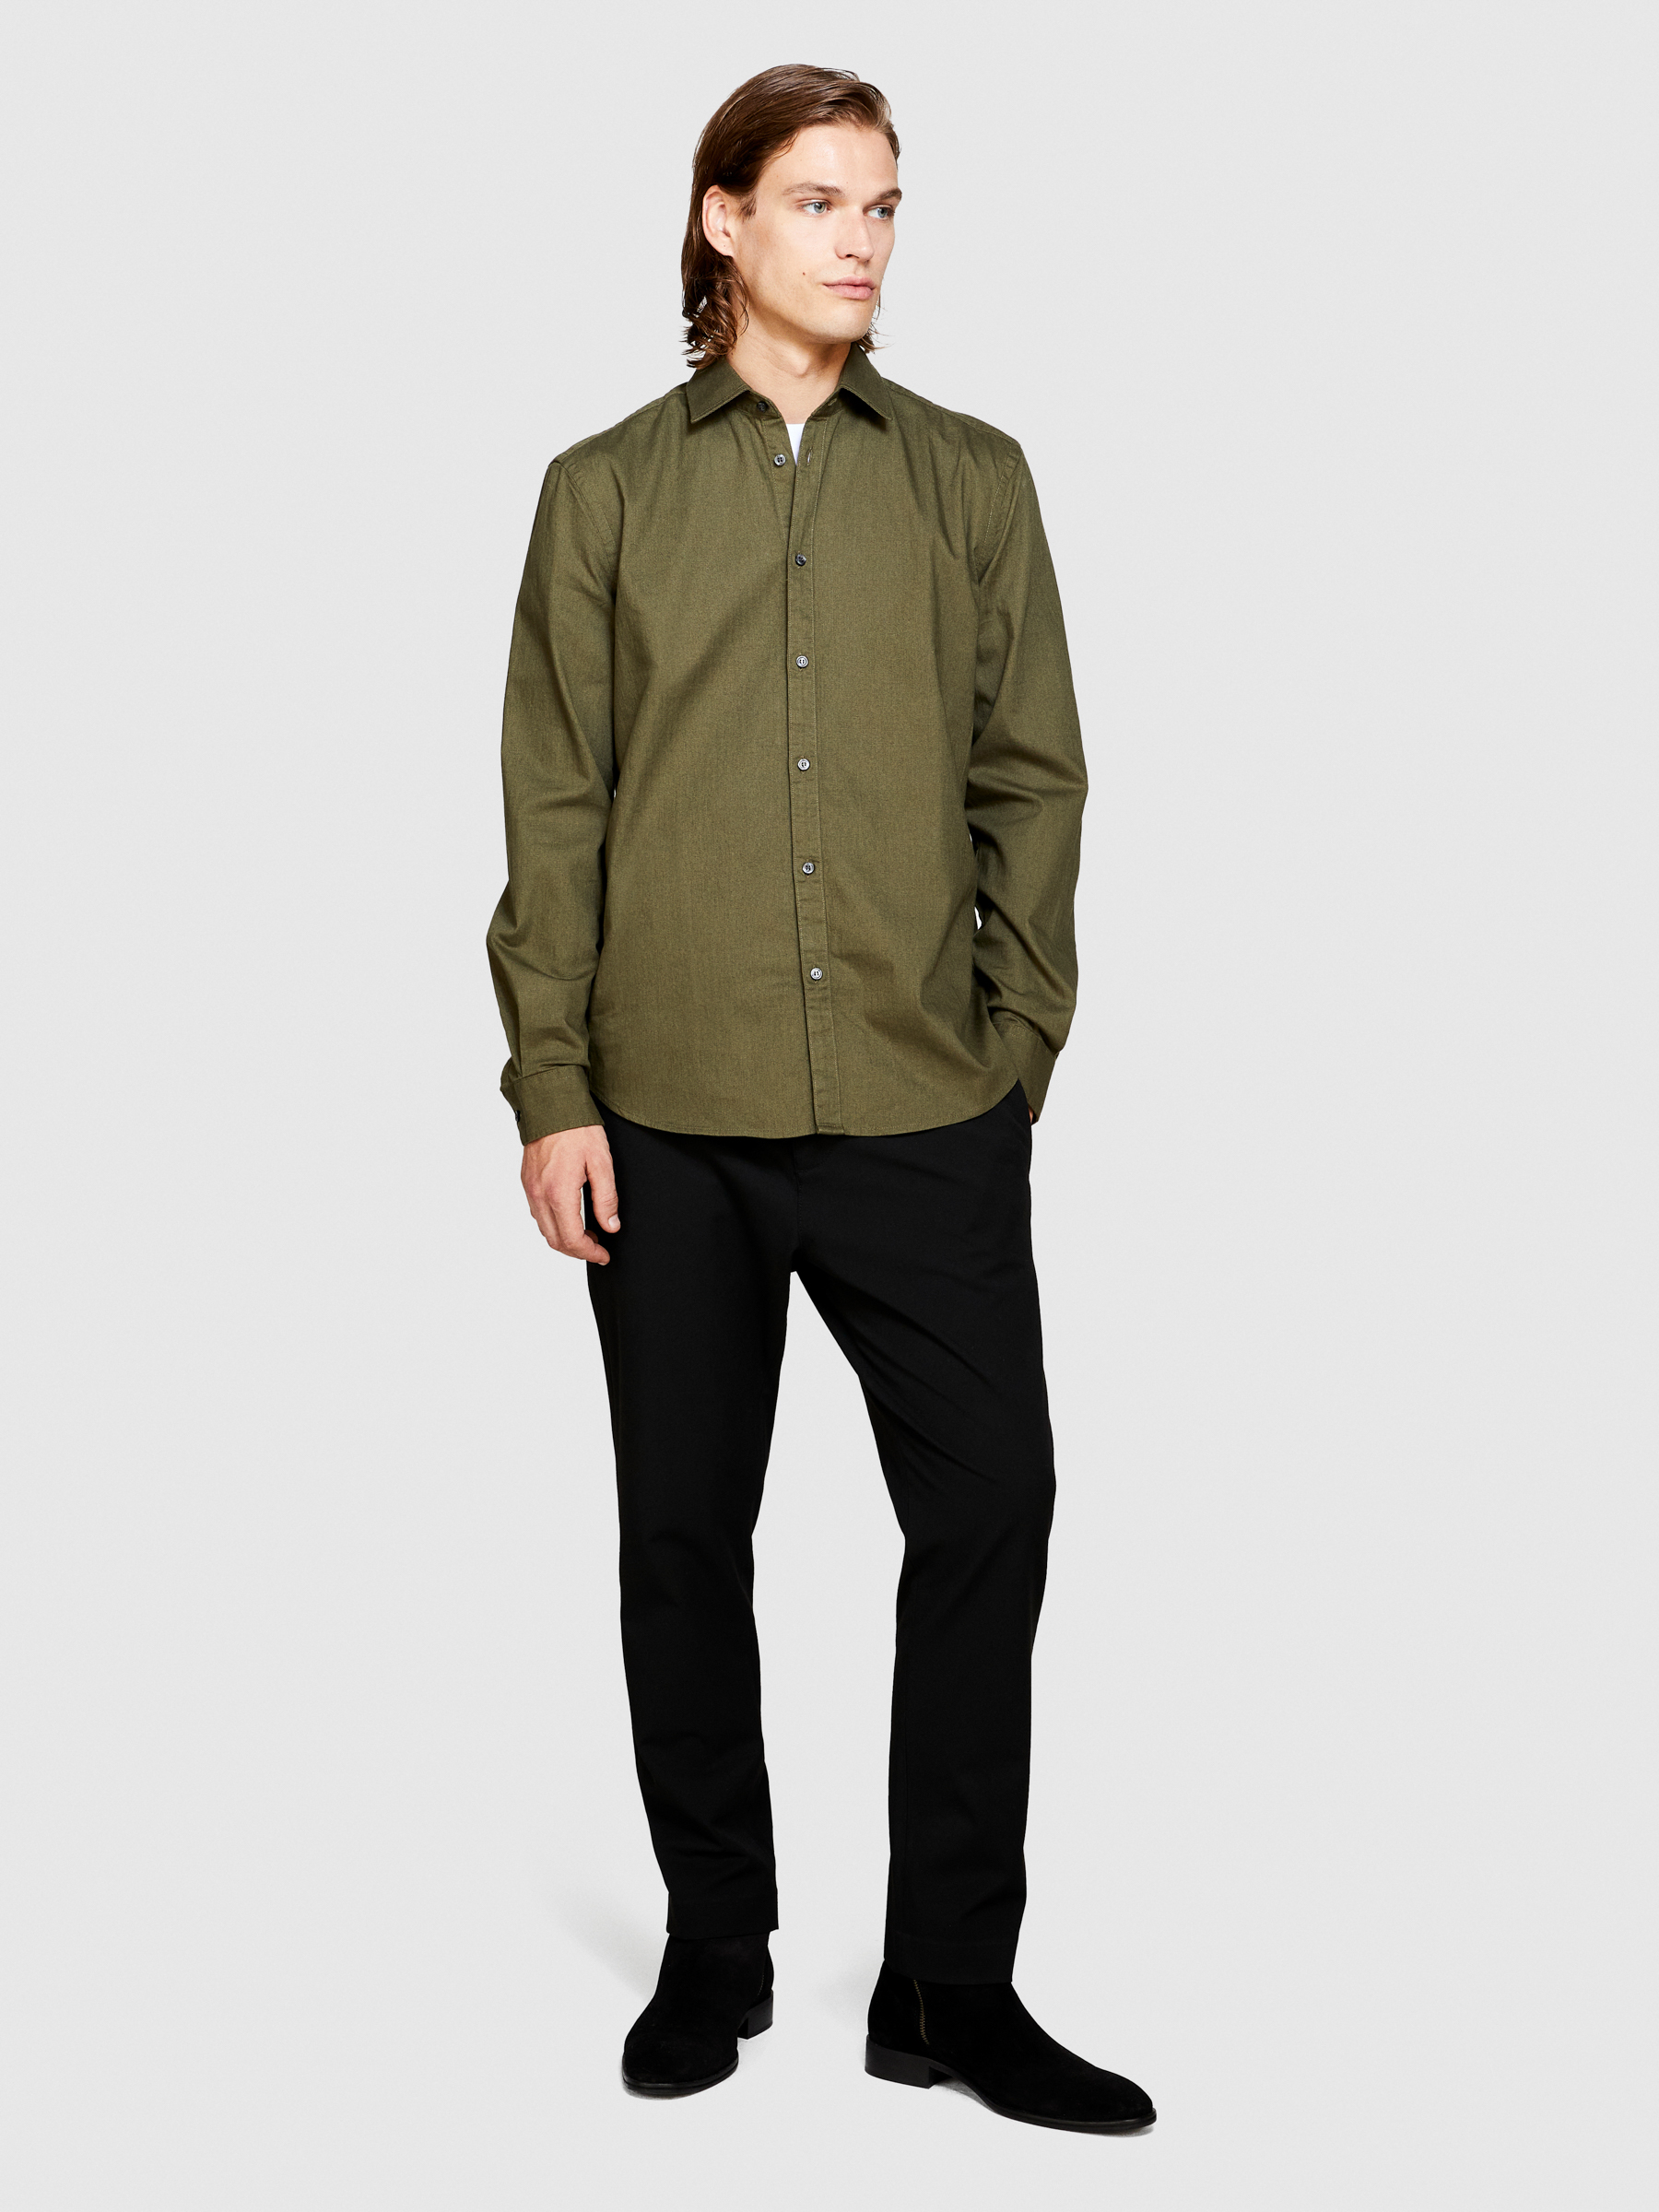 Sisley - Solid Colored Shirt, Man, Military Green, Size: 44